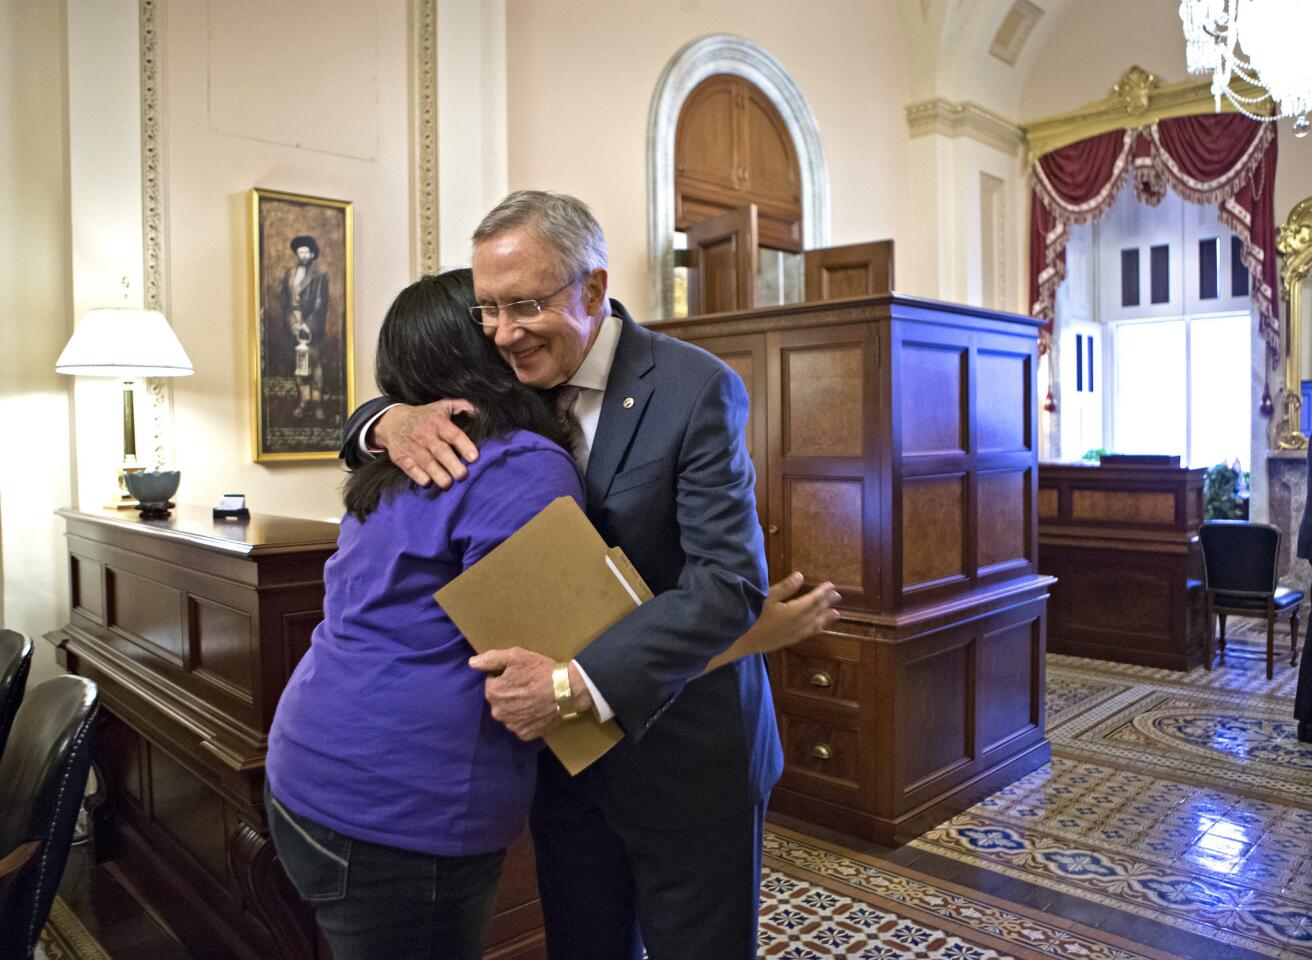 Reid embraces Silva at the Capitol on June 27, 2013. He carries a folder with letters from her that he read on the Senate floor before the historic vote on immigration reform.